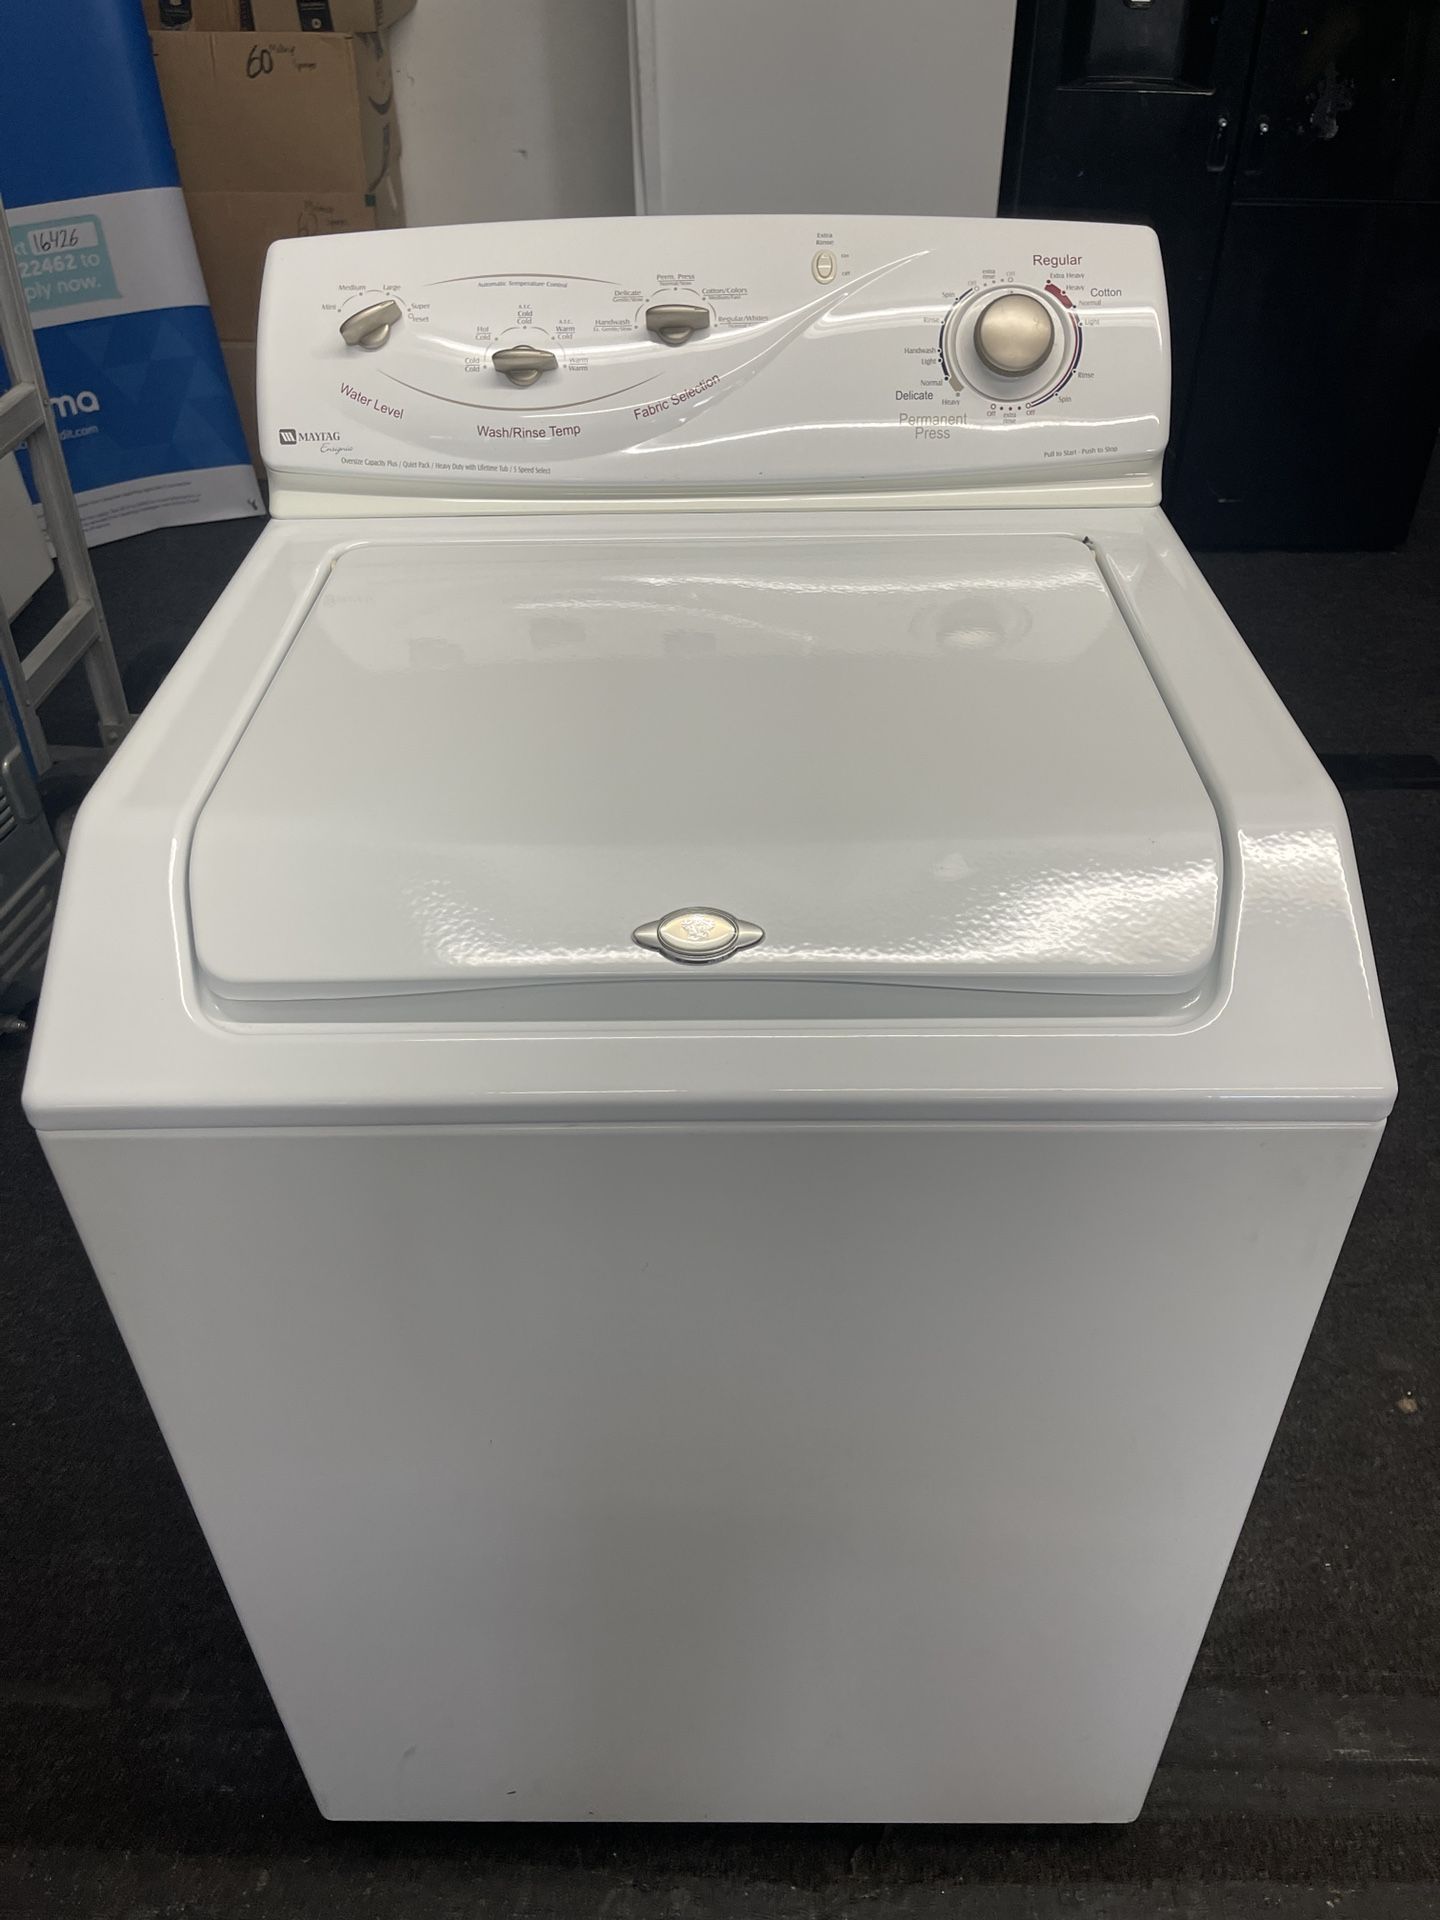 Maytag Ensignia Oversize Capacity Plus Top Load Washer